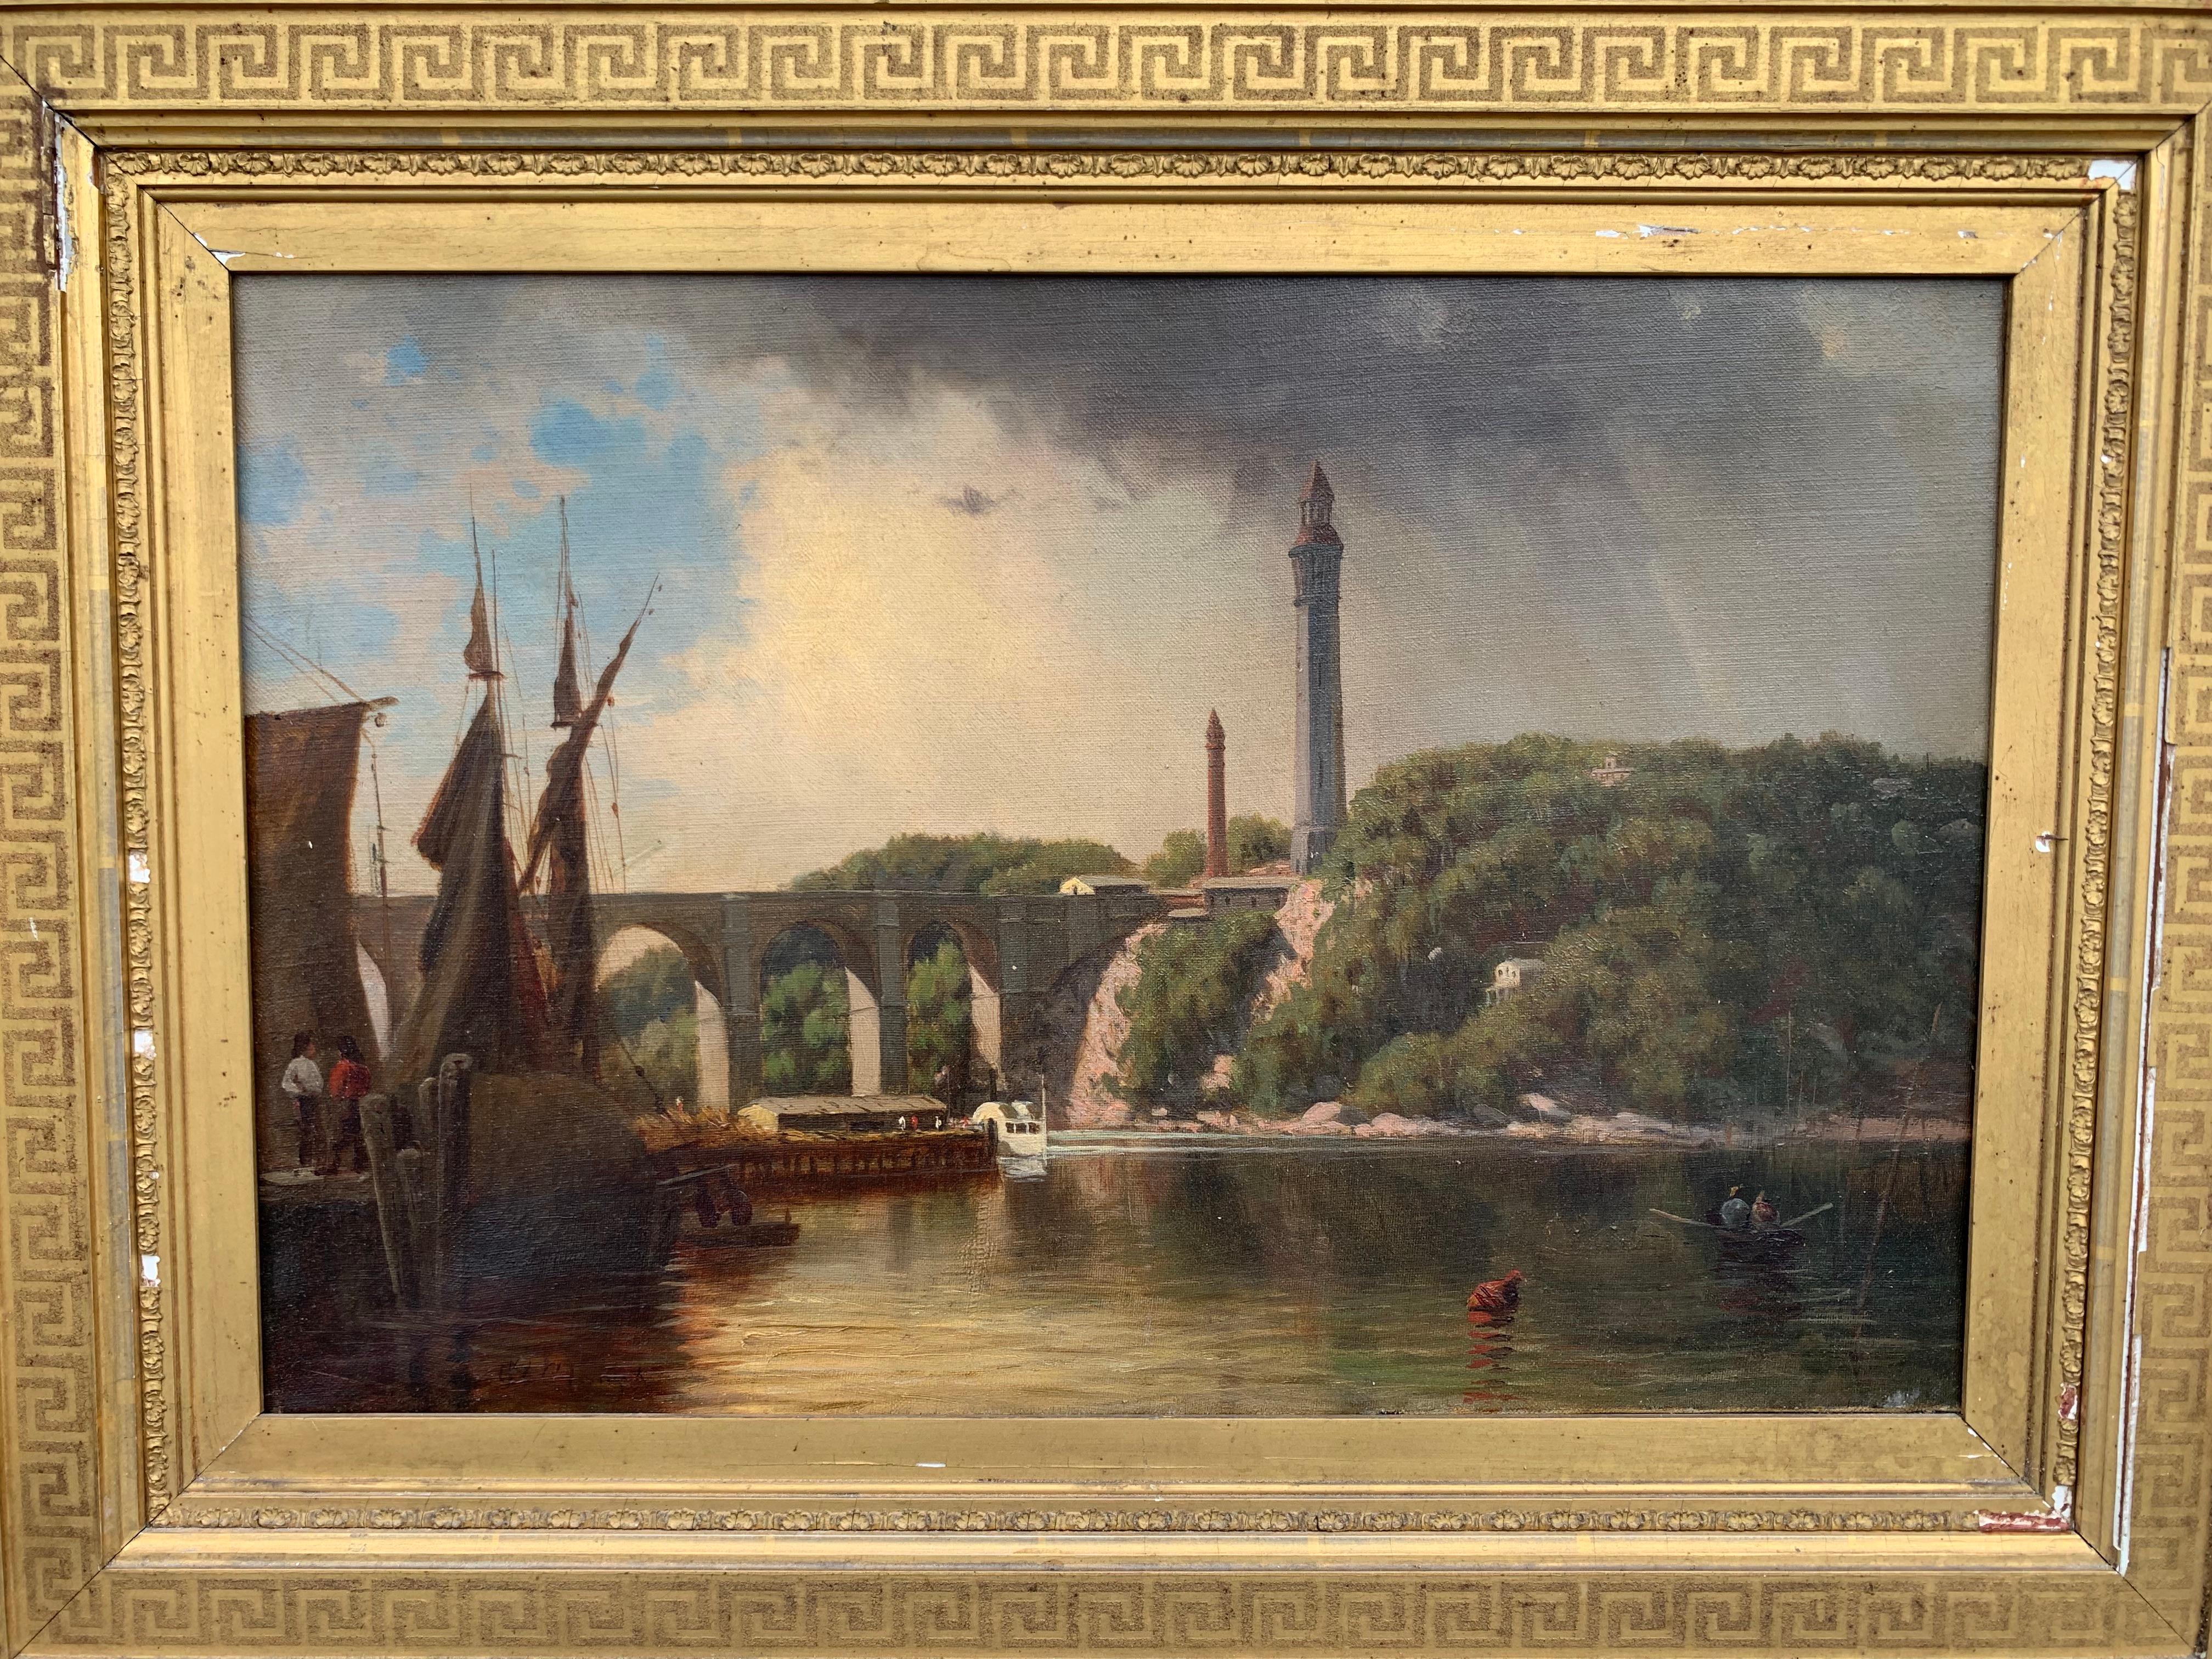 High Bridge and Croton Waterworks (Harlem River) - Painting by George L. Clough